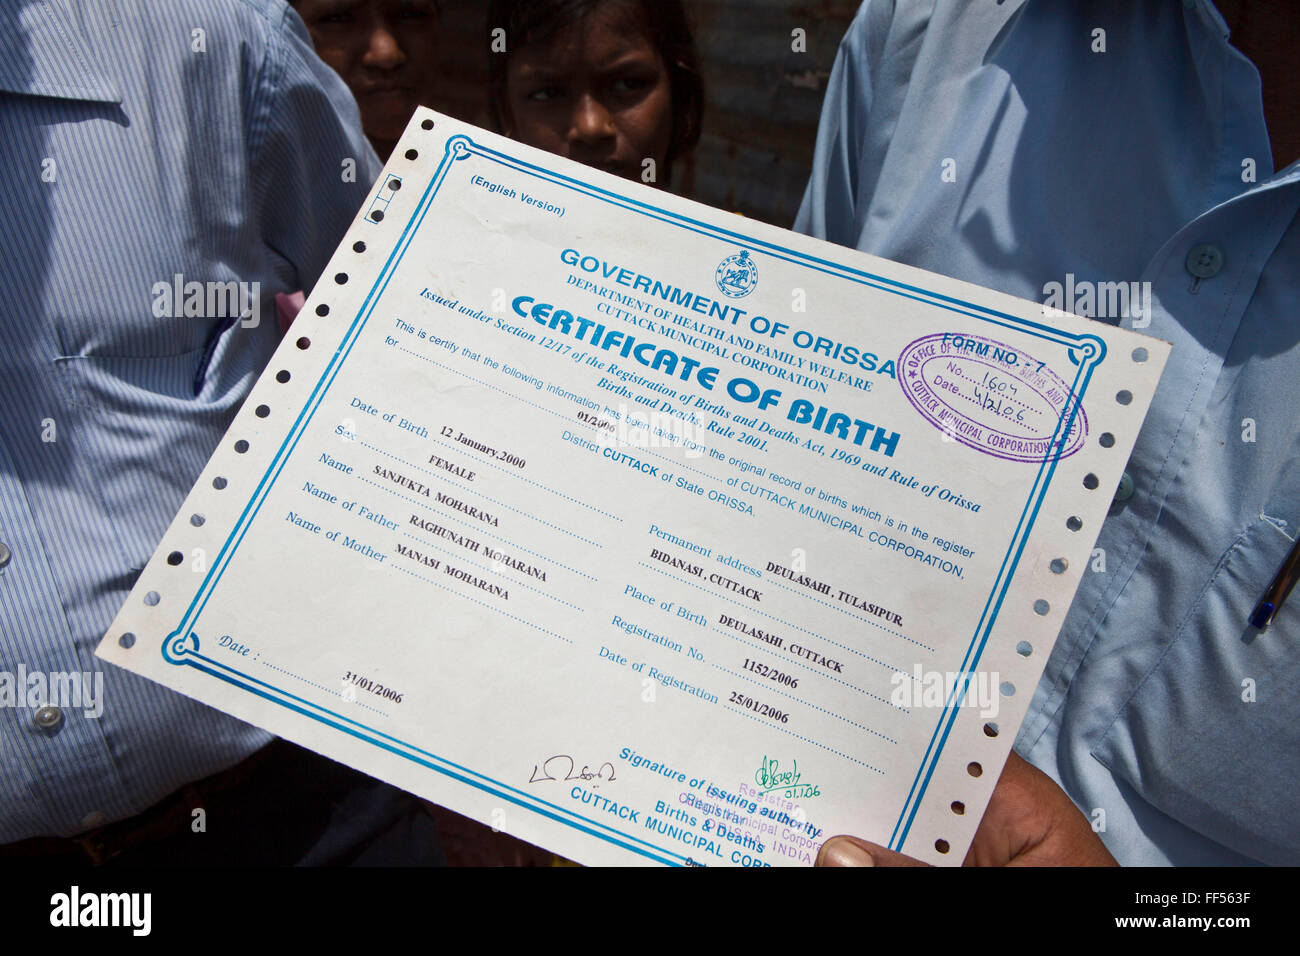 Children from the Dobhanda Nagar slum in Cuttack receive birth certificates from the Urban Law centre run by the organisation CLAP. Committee for Legal Aid to Poor (CLAP) helps provide legal aid to the poorer communities in the Orissa district of India. Stock Photo